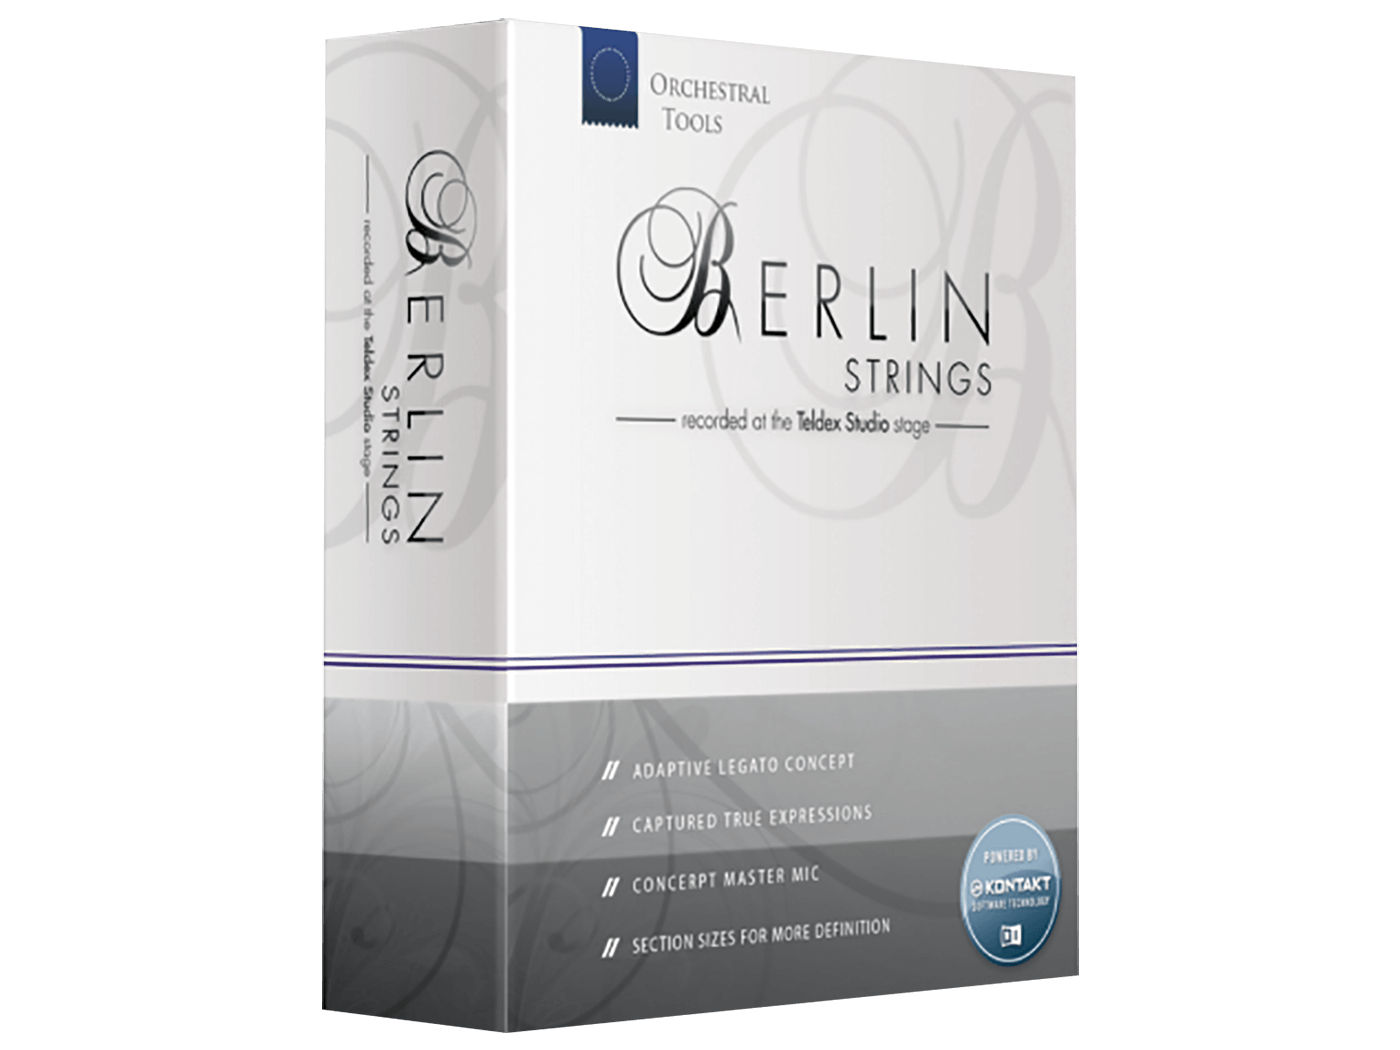 Orchestral Tools Berlin Strings